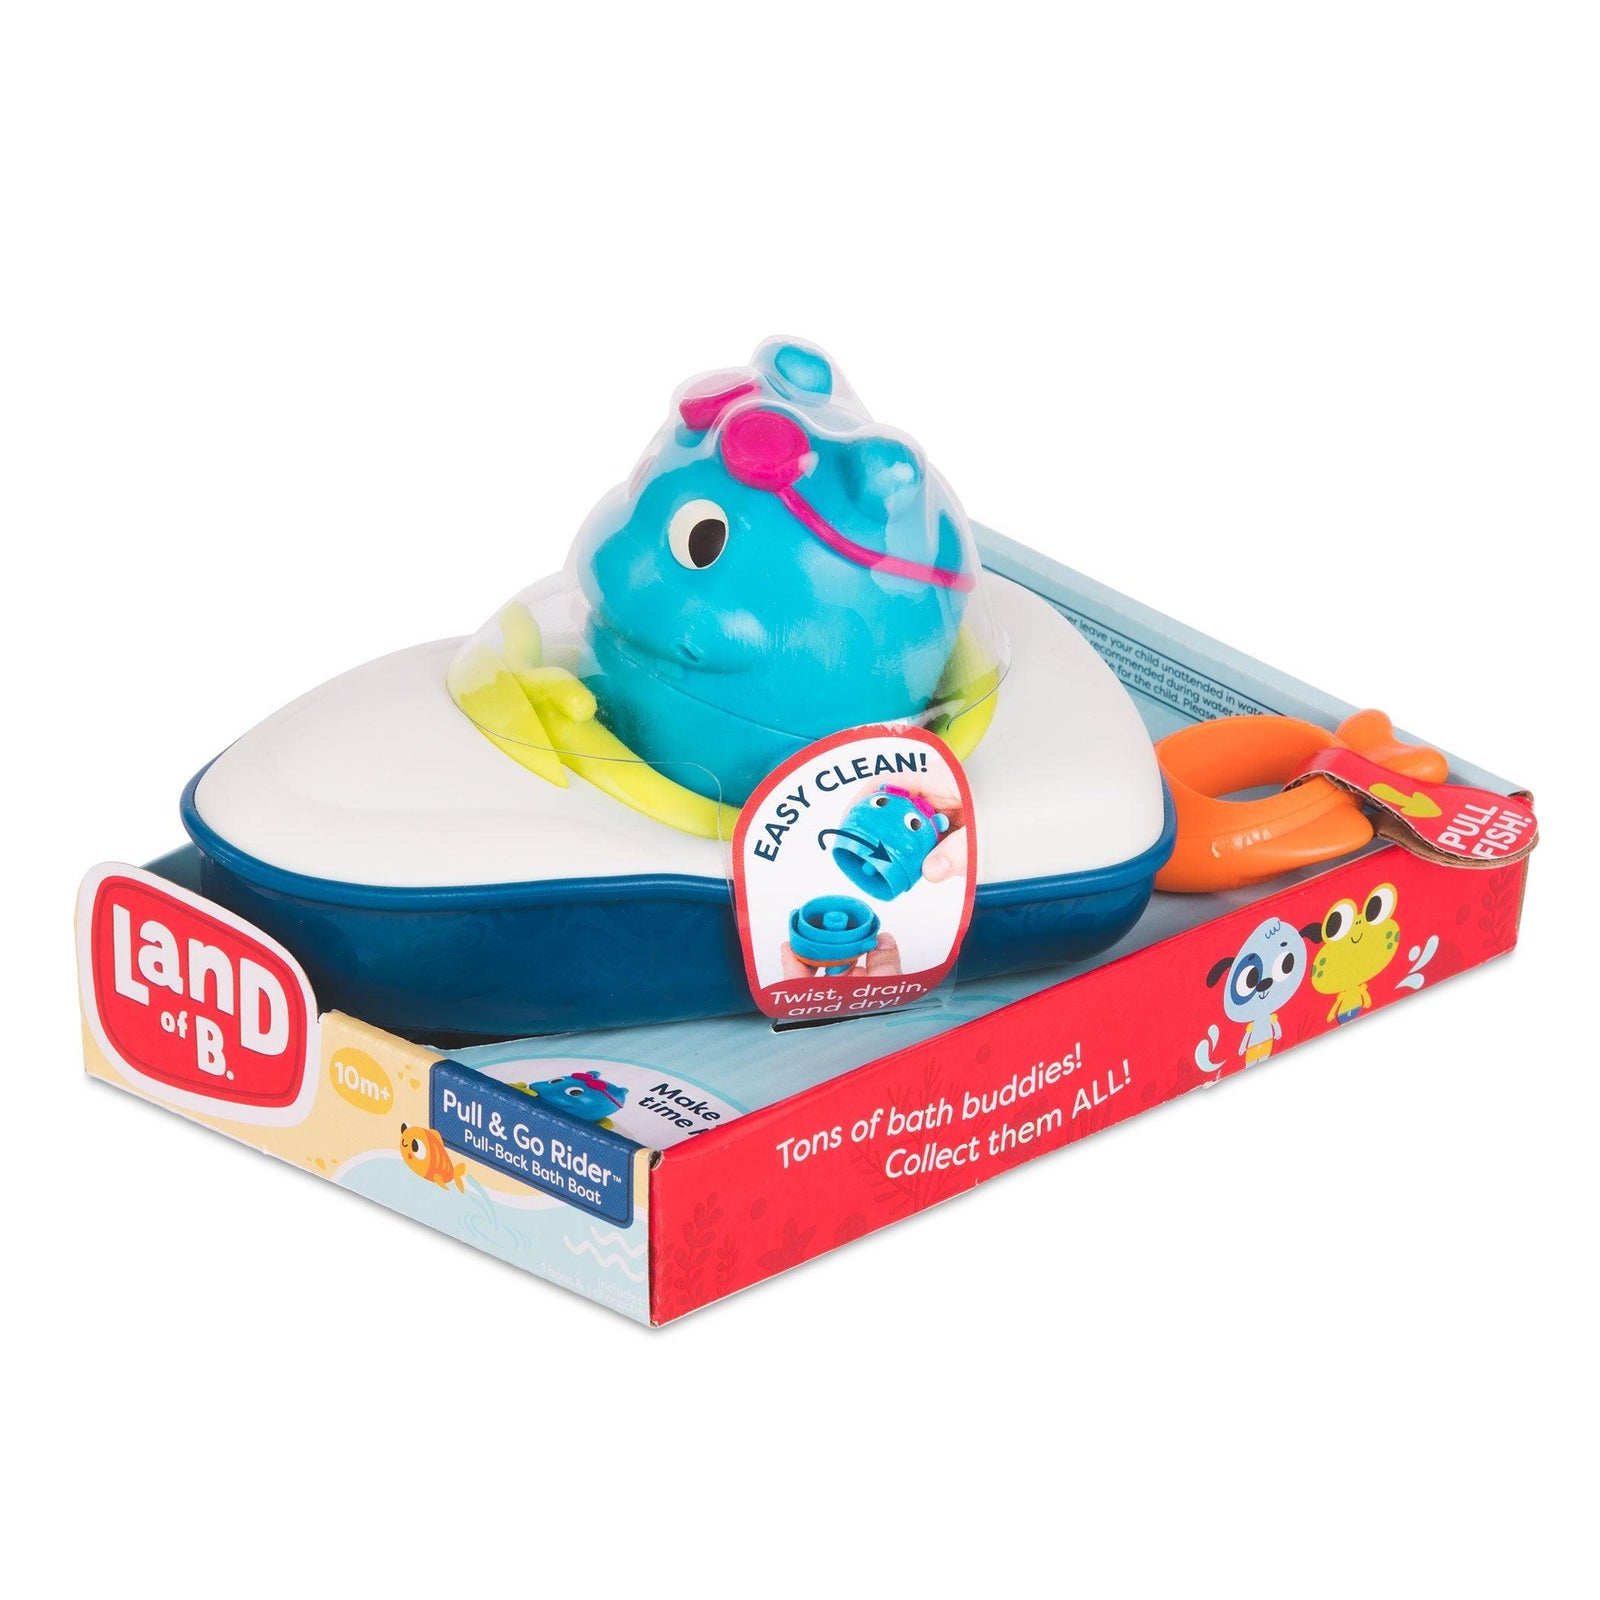 B.Toys: Pull & Go Rider powered boat